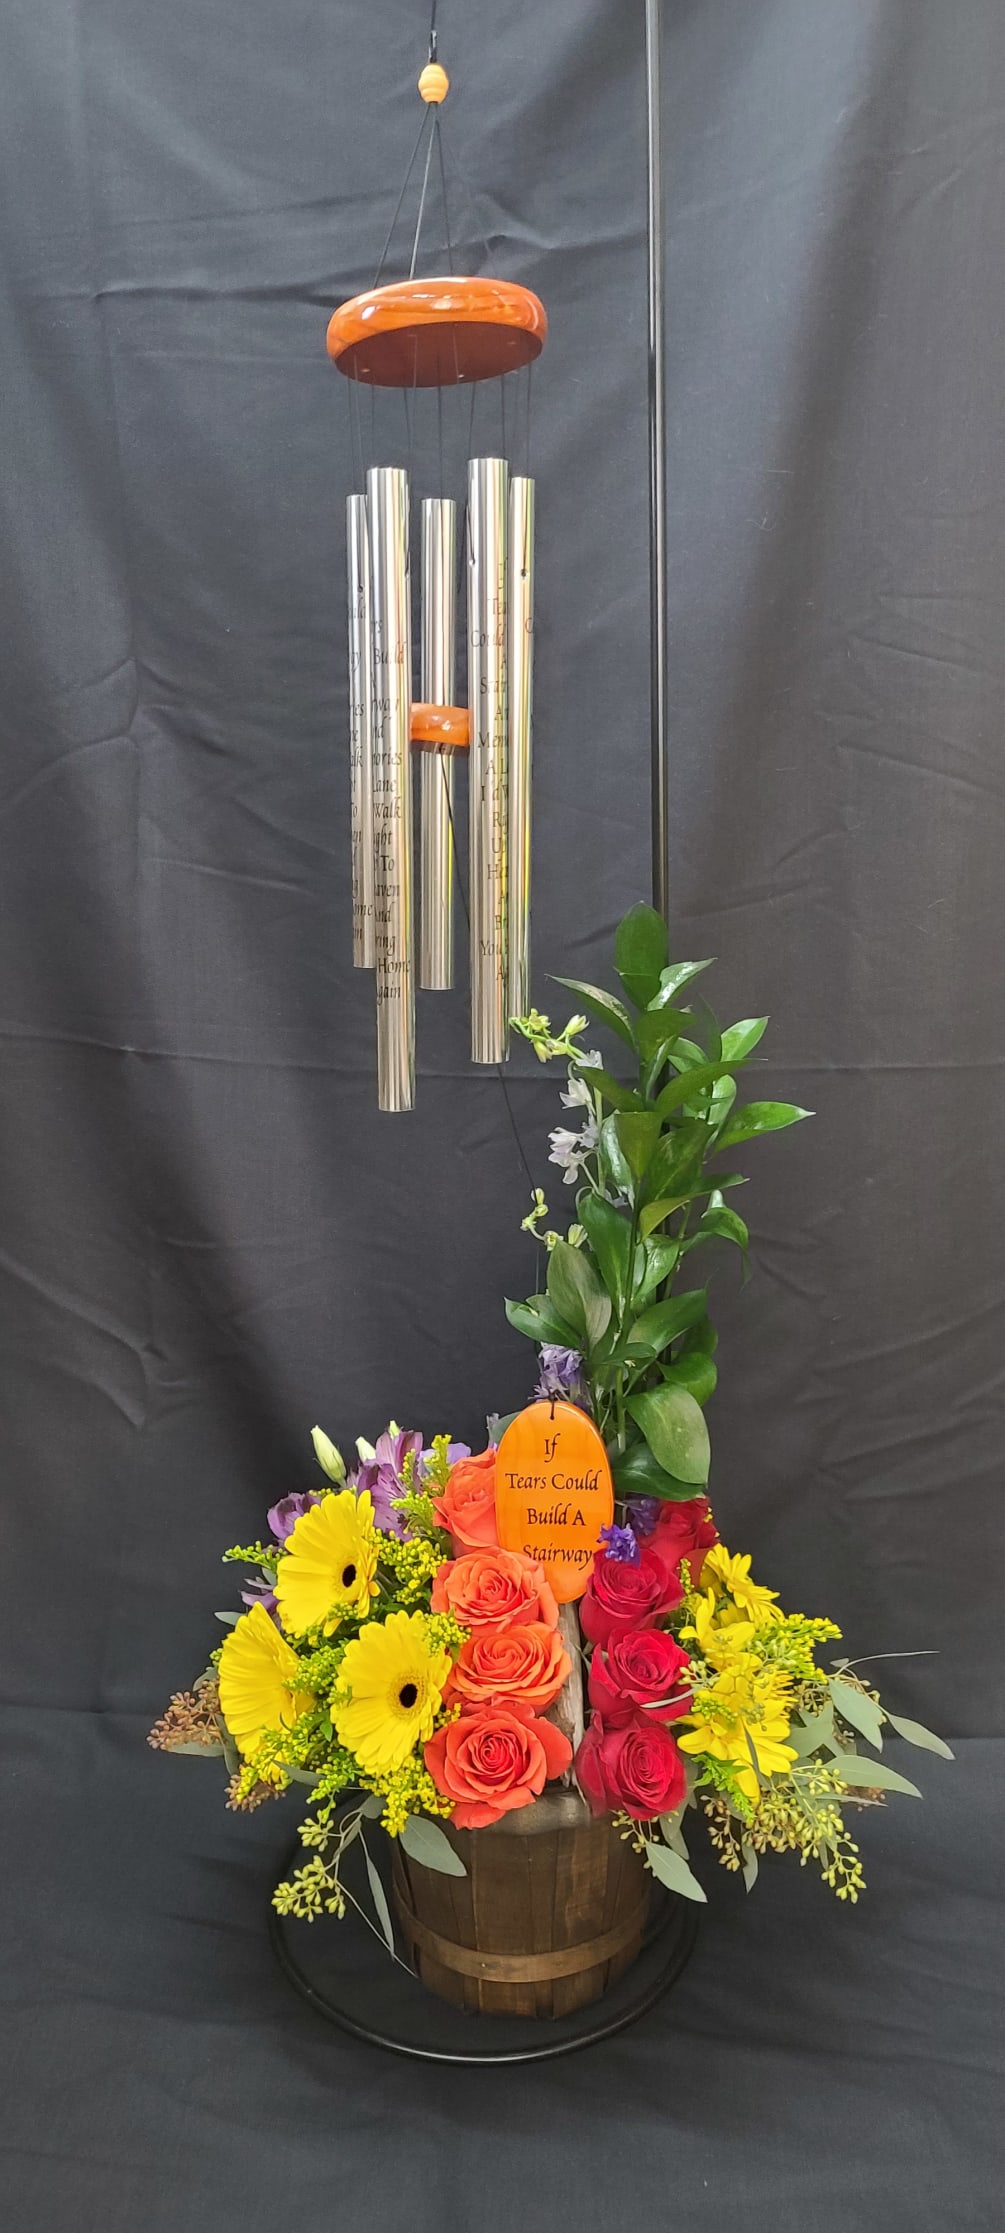 Wind Chime artfully displayed in a copper container accented with roses, alstromaria